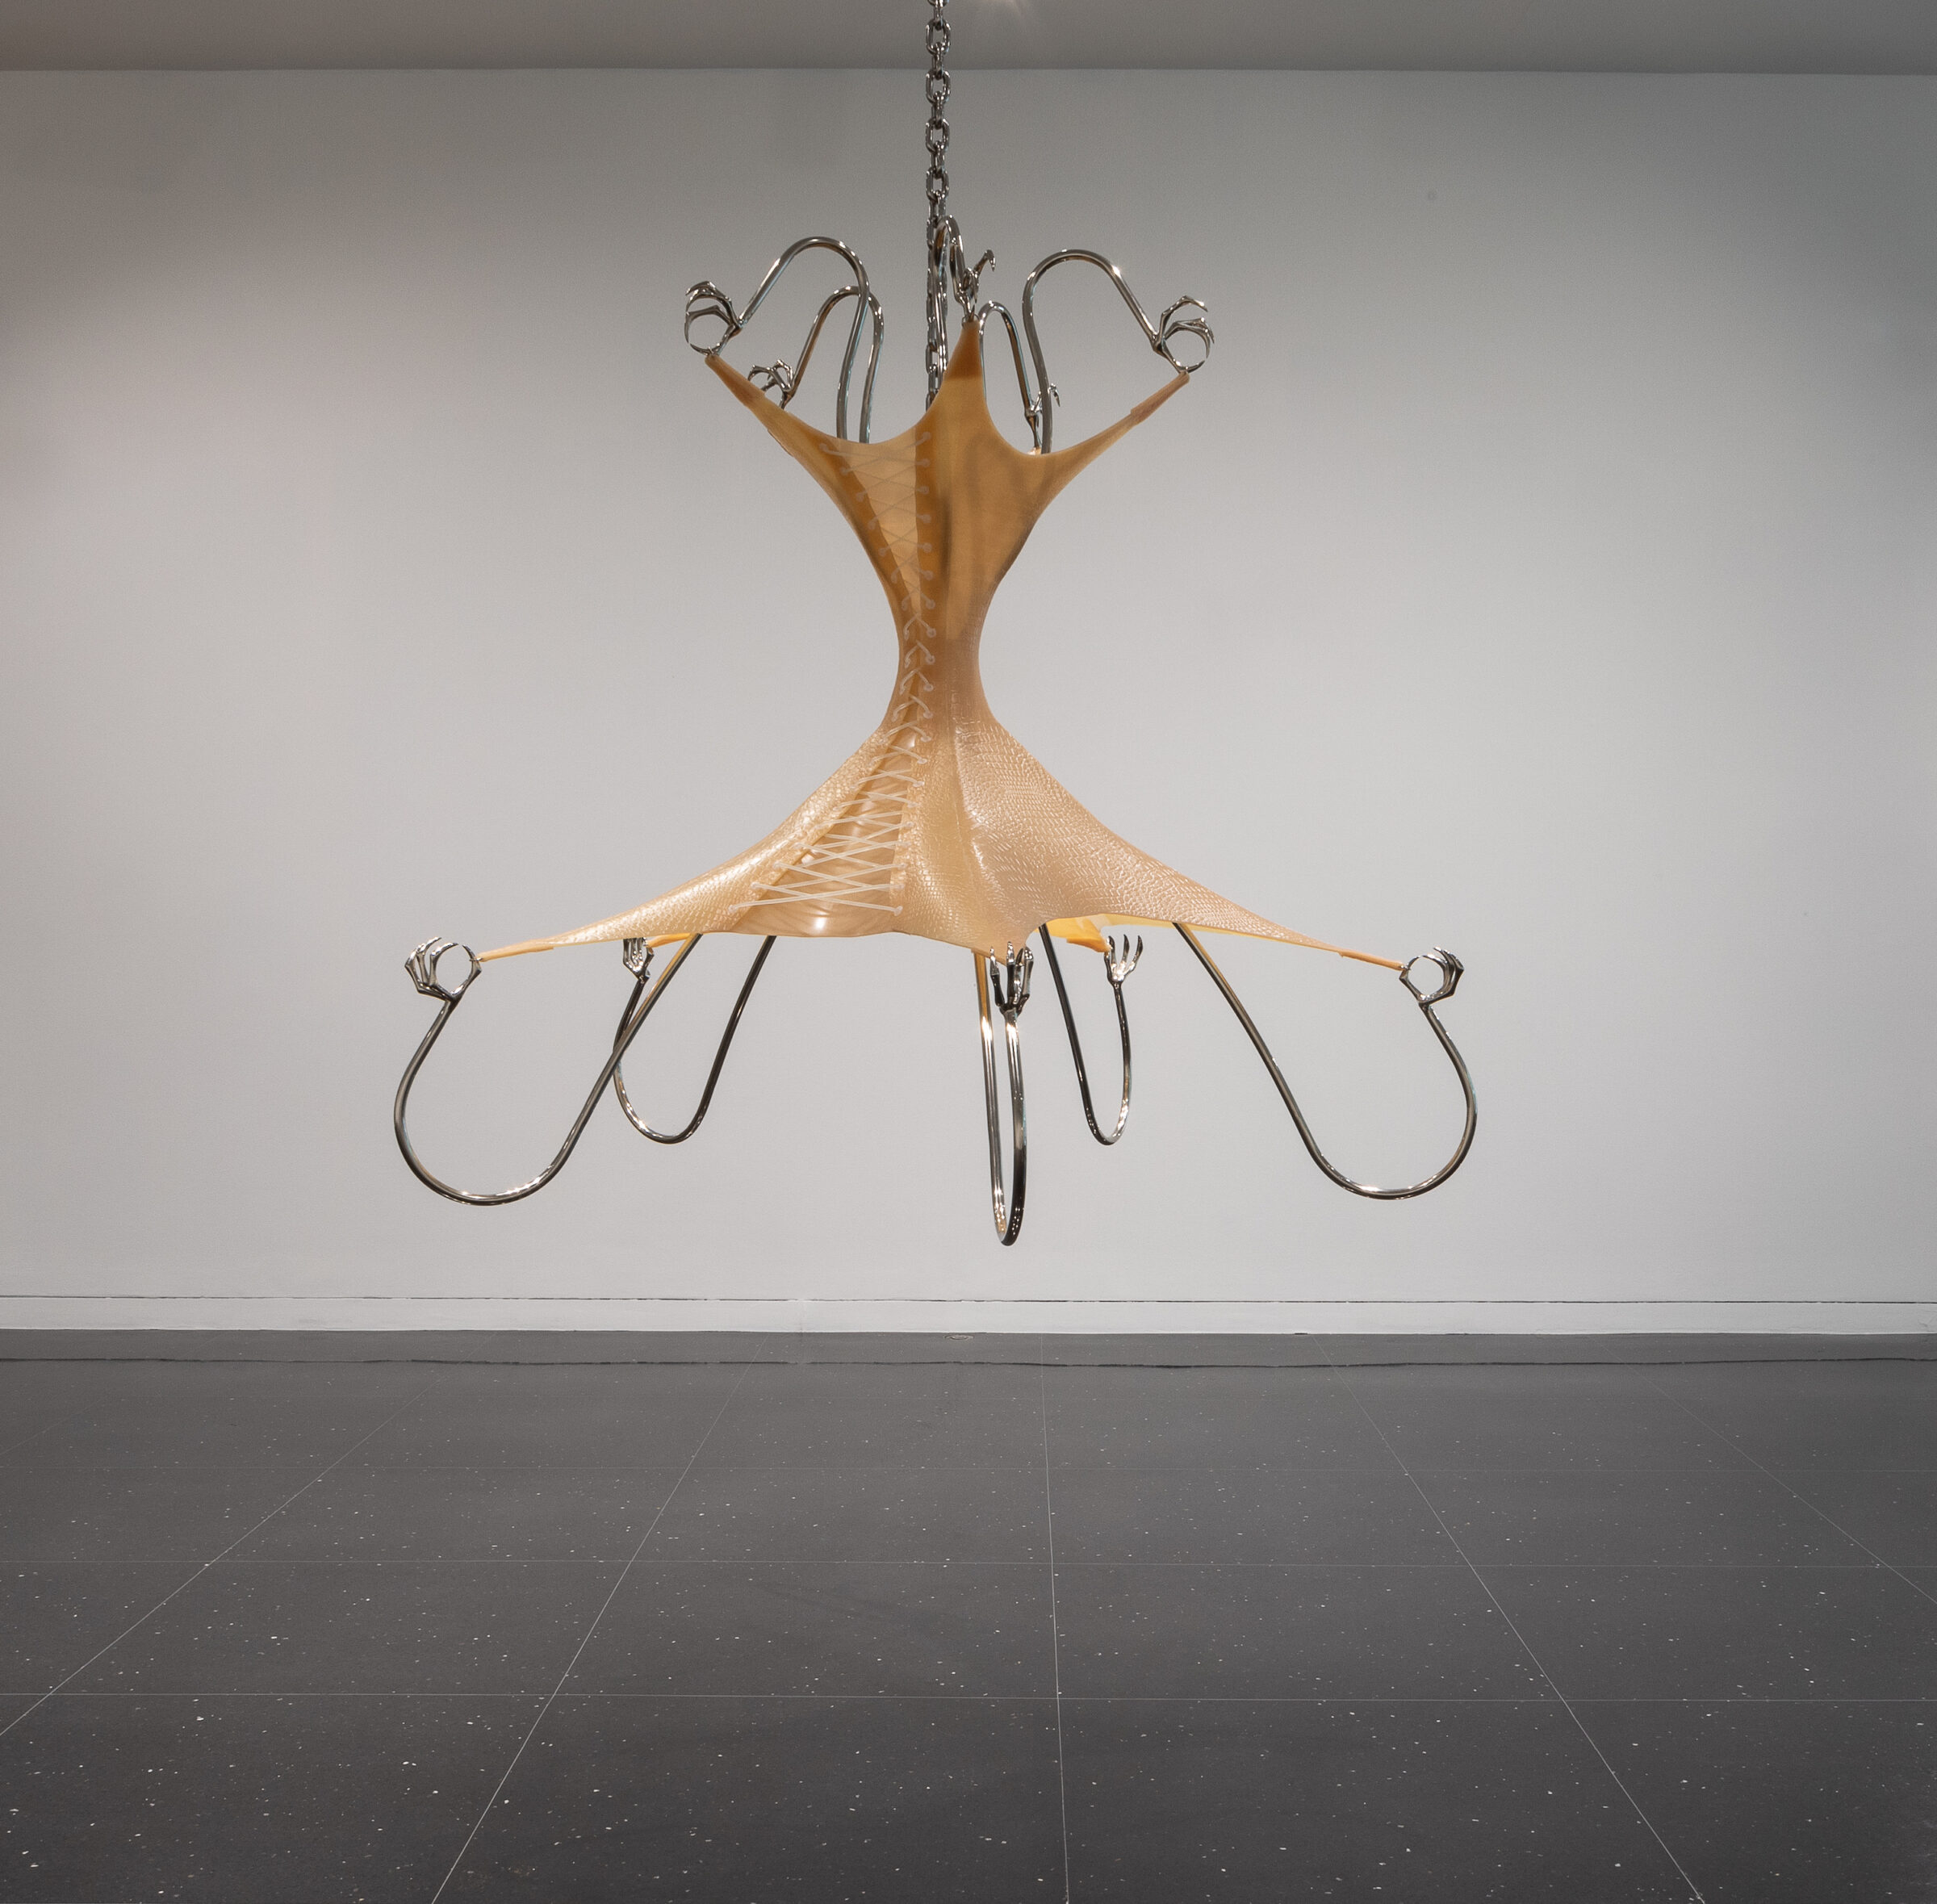 A steel and flesh-toned latex sculpture resembling a mix between a corset and a chandelier is suspended in a white gallery space.